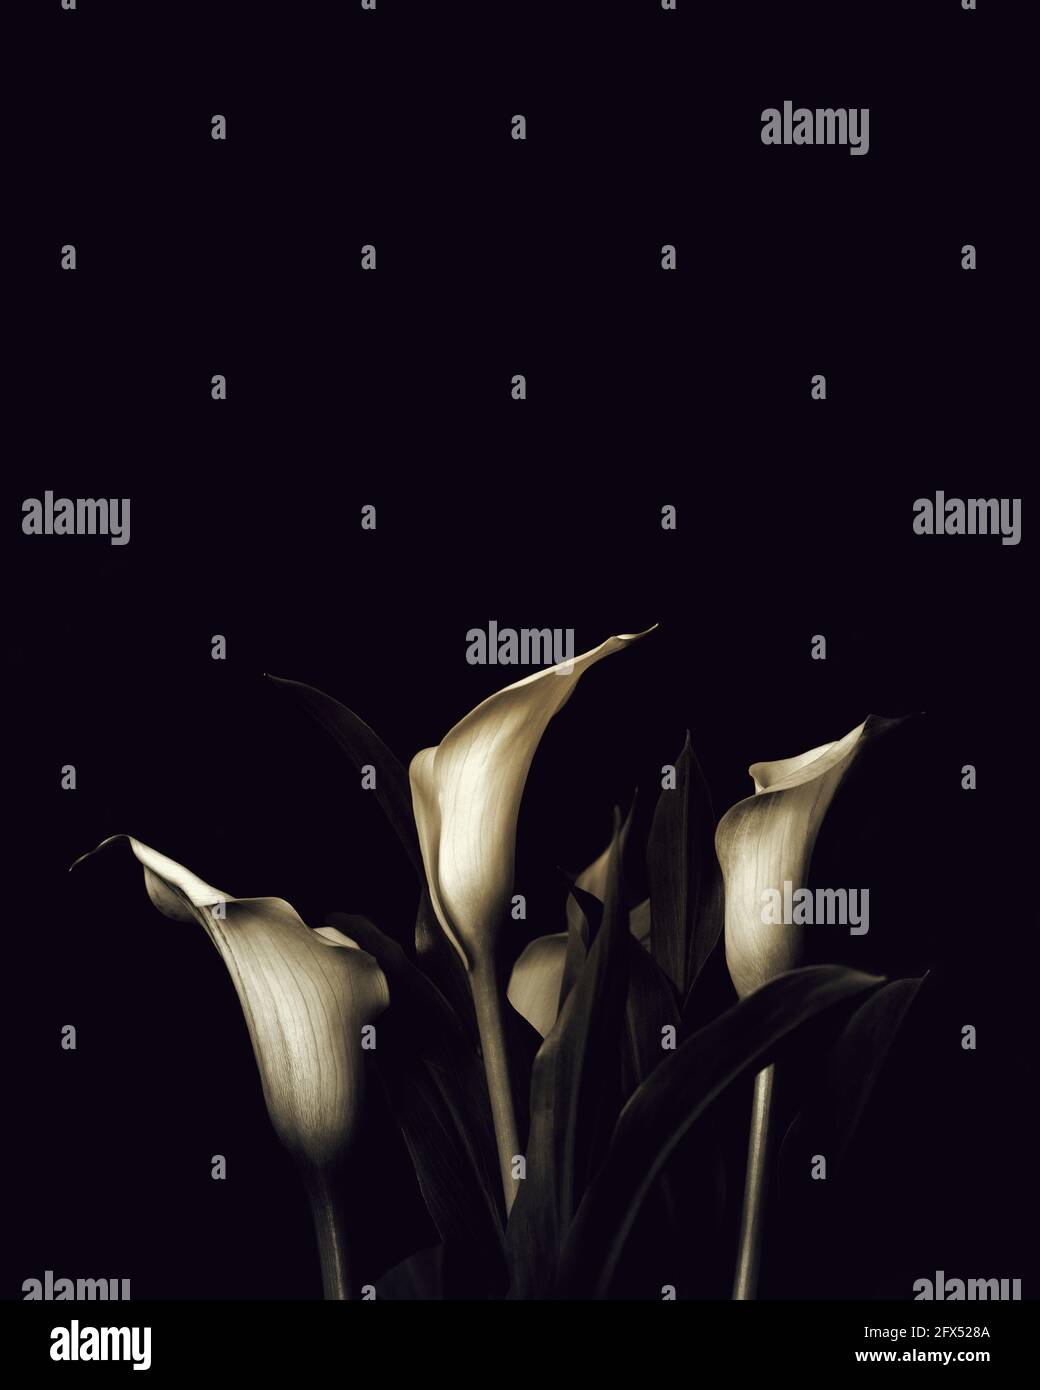 Sympathy card with calla lily flowers and copy space. Funeral flowers on dark background Stock Photo